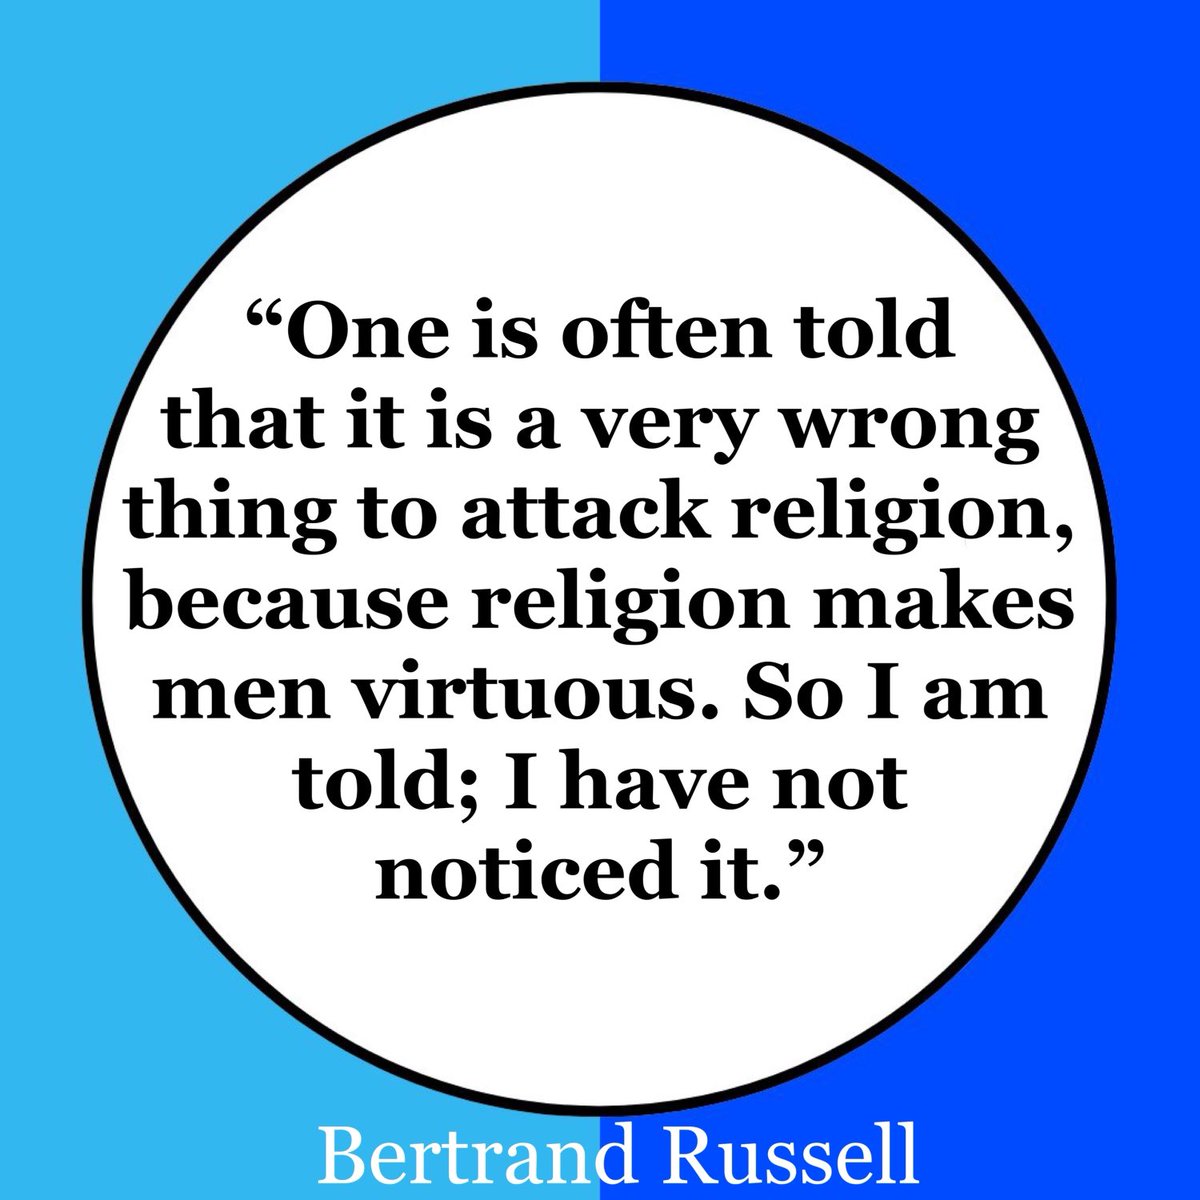 #TheLightOfSpirit ⭐️⭐️⭐️
#Quote #QuoteOfTheDay
#Inspiration #Motivation
#FoodForThought 🤔🤔🤔
#BertrandRussell